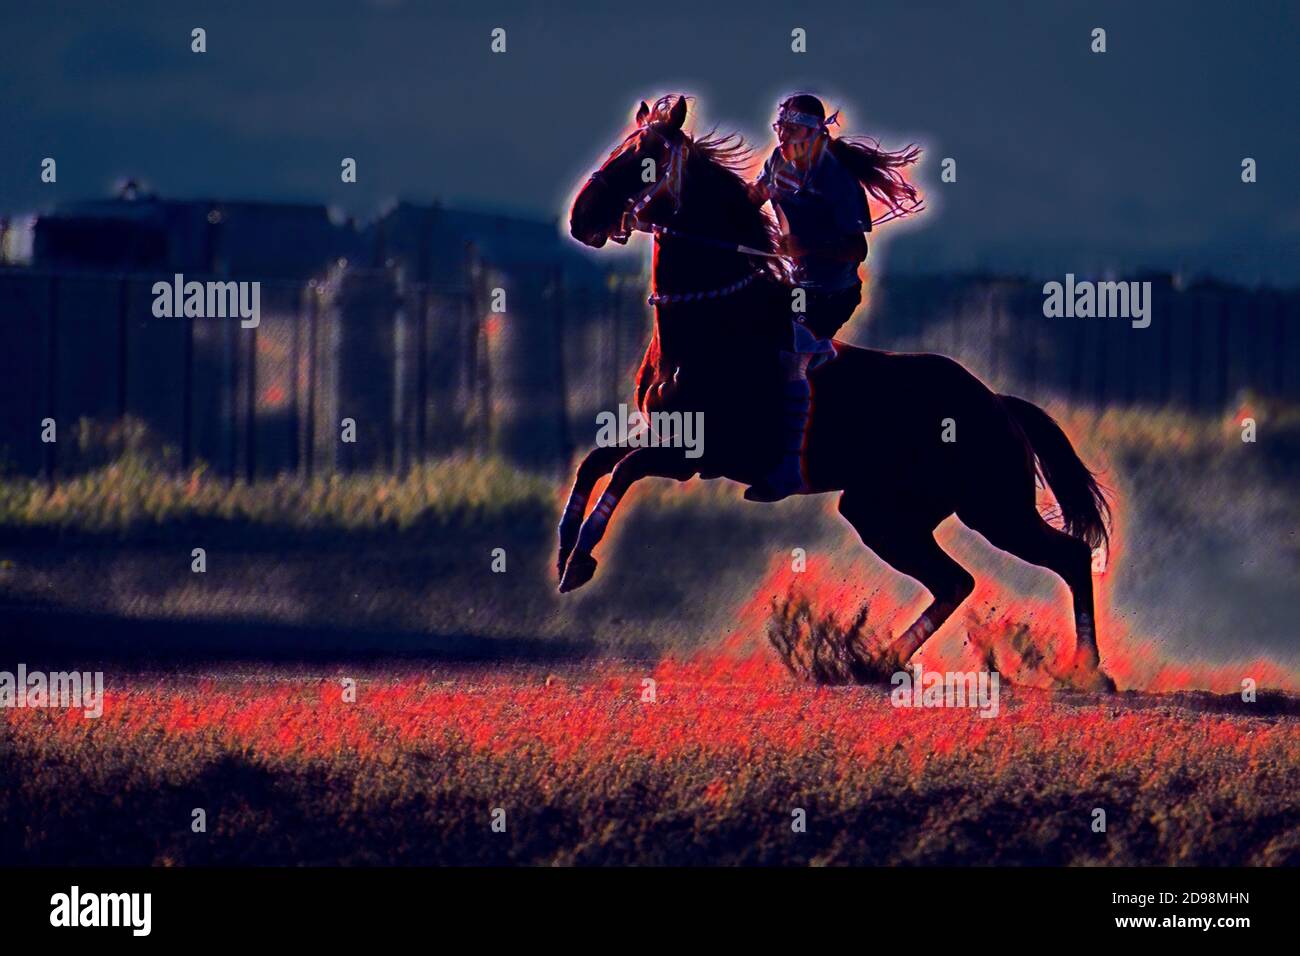 Illustration or painting of an North American Indian warrior on a rearing horse Stock Photo